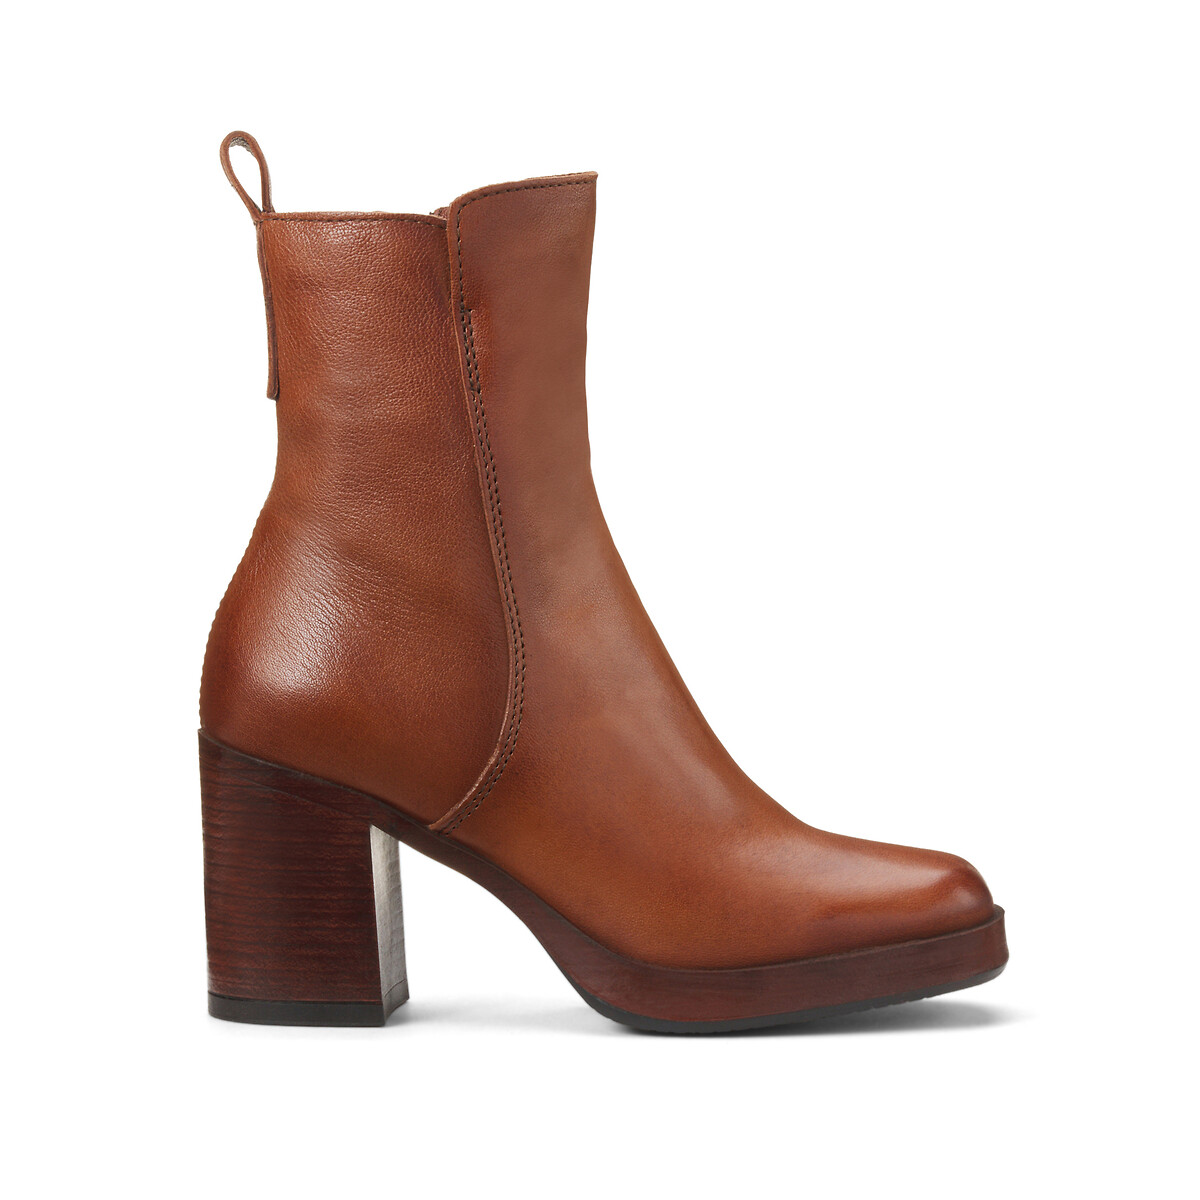 Leather Zipped Ankle Boots with Square Toe